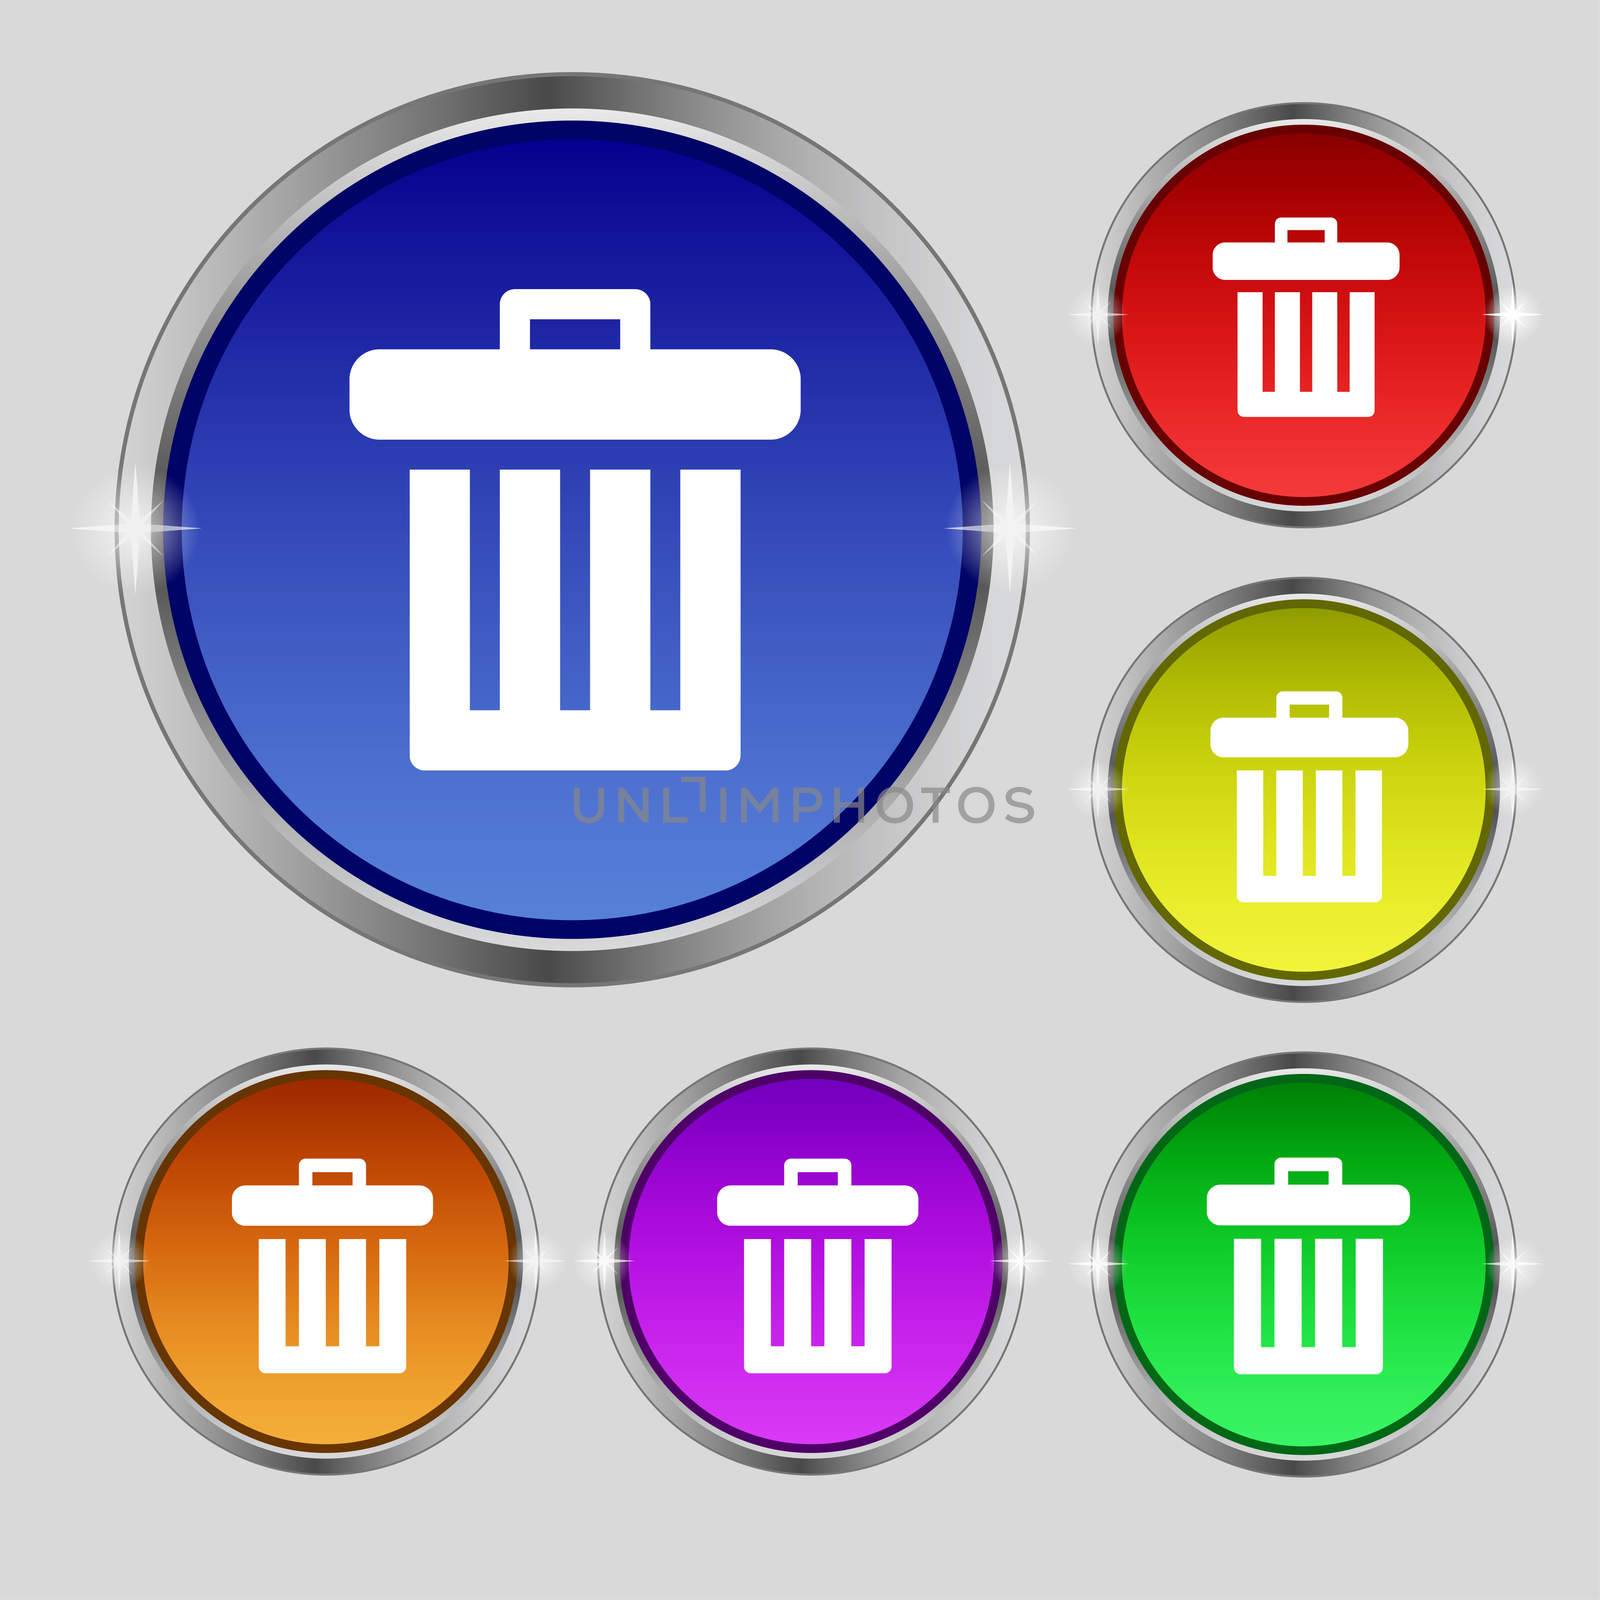 Recycle bin icon sign. Round symbol on bright colourful buttons. illustration